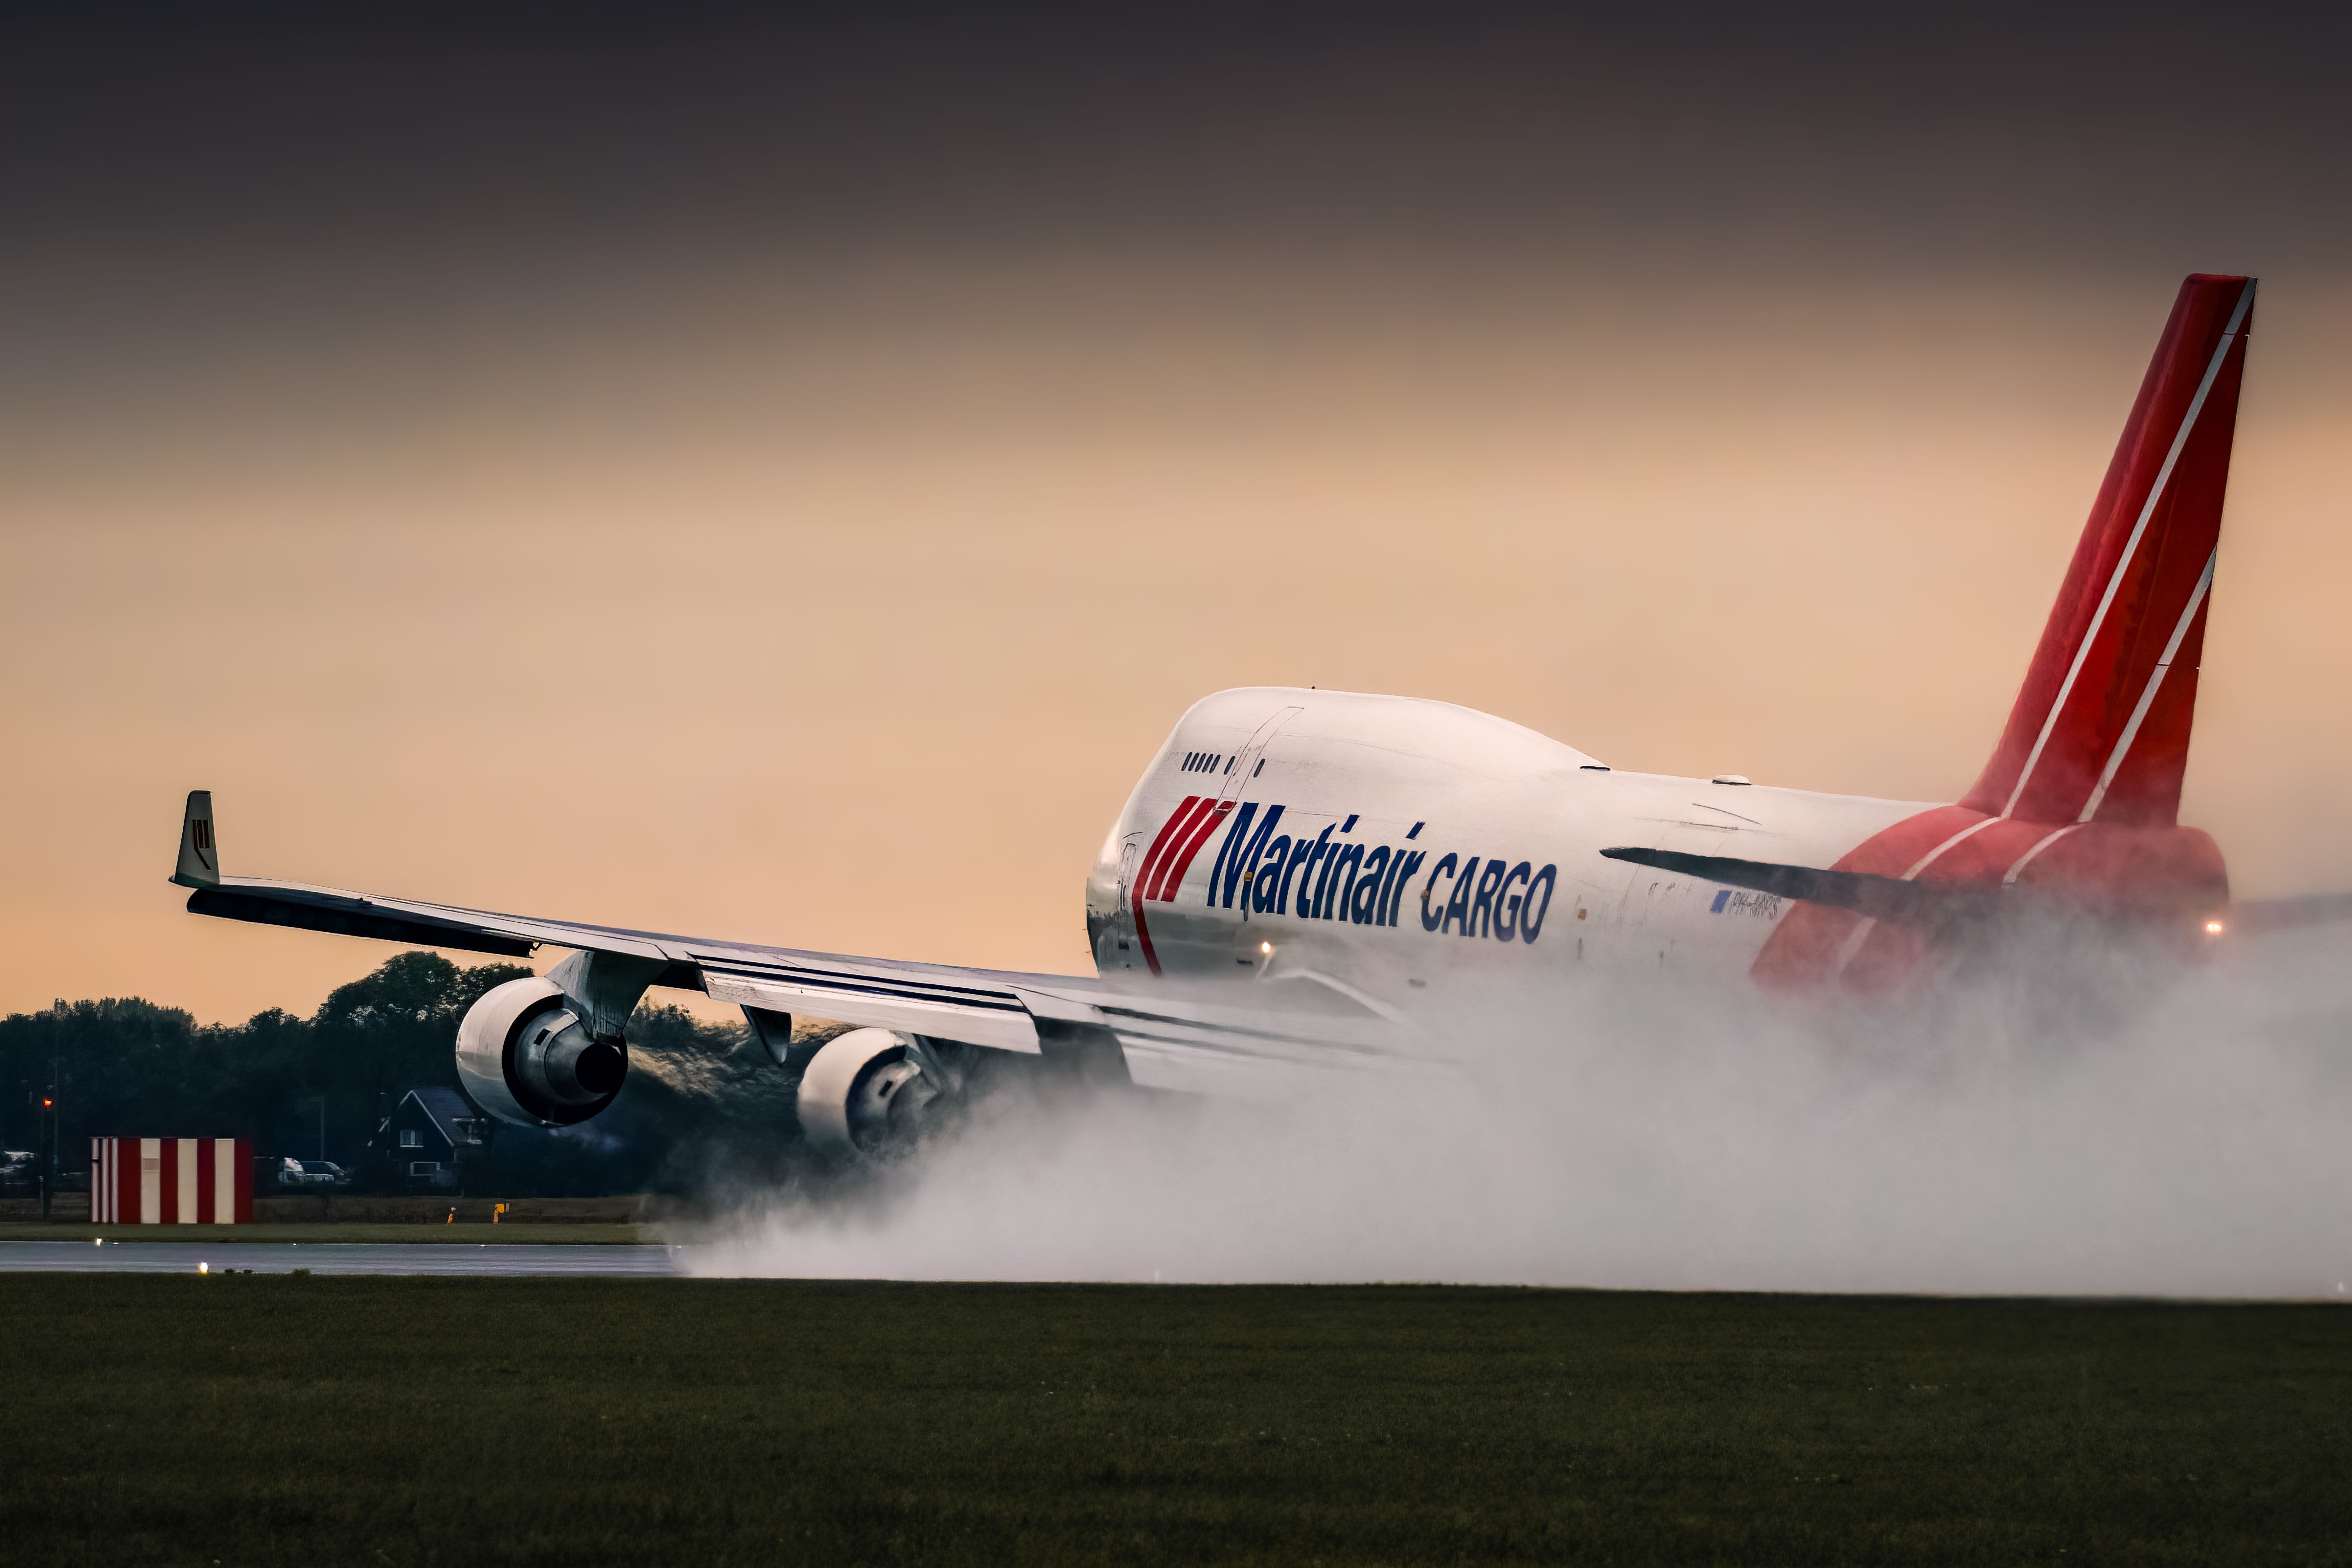 Martinair Boeing 747 Taking Off With Spray